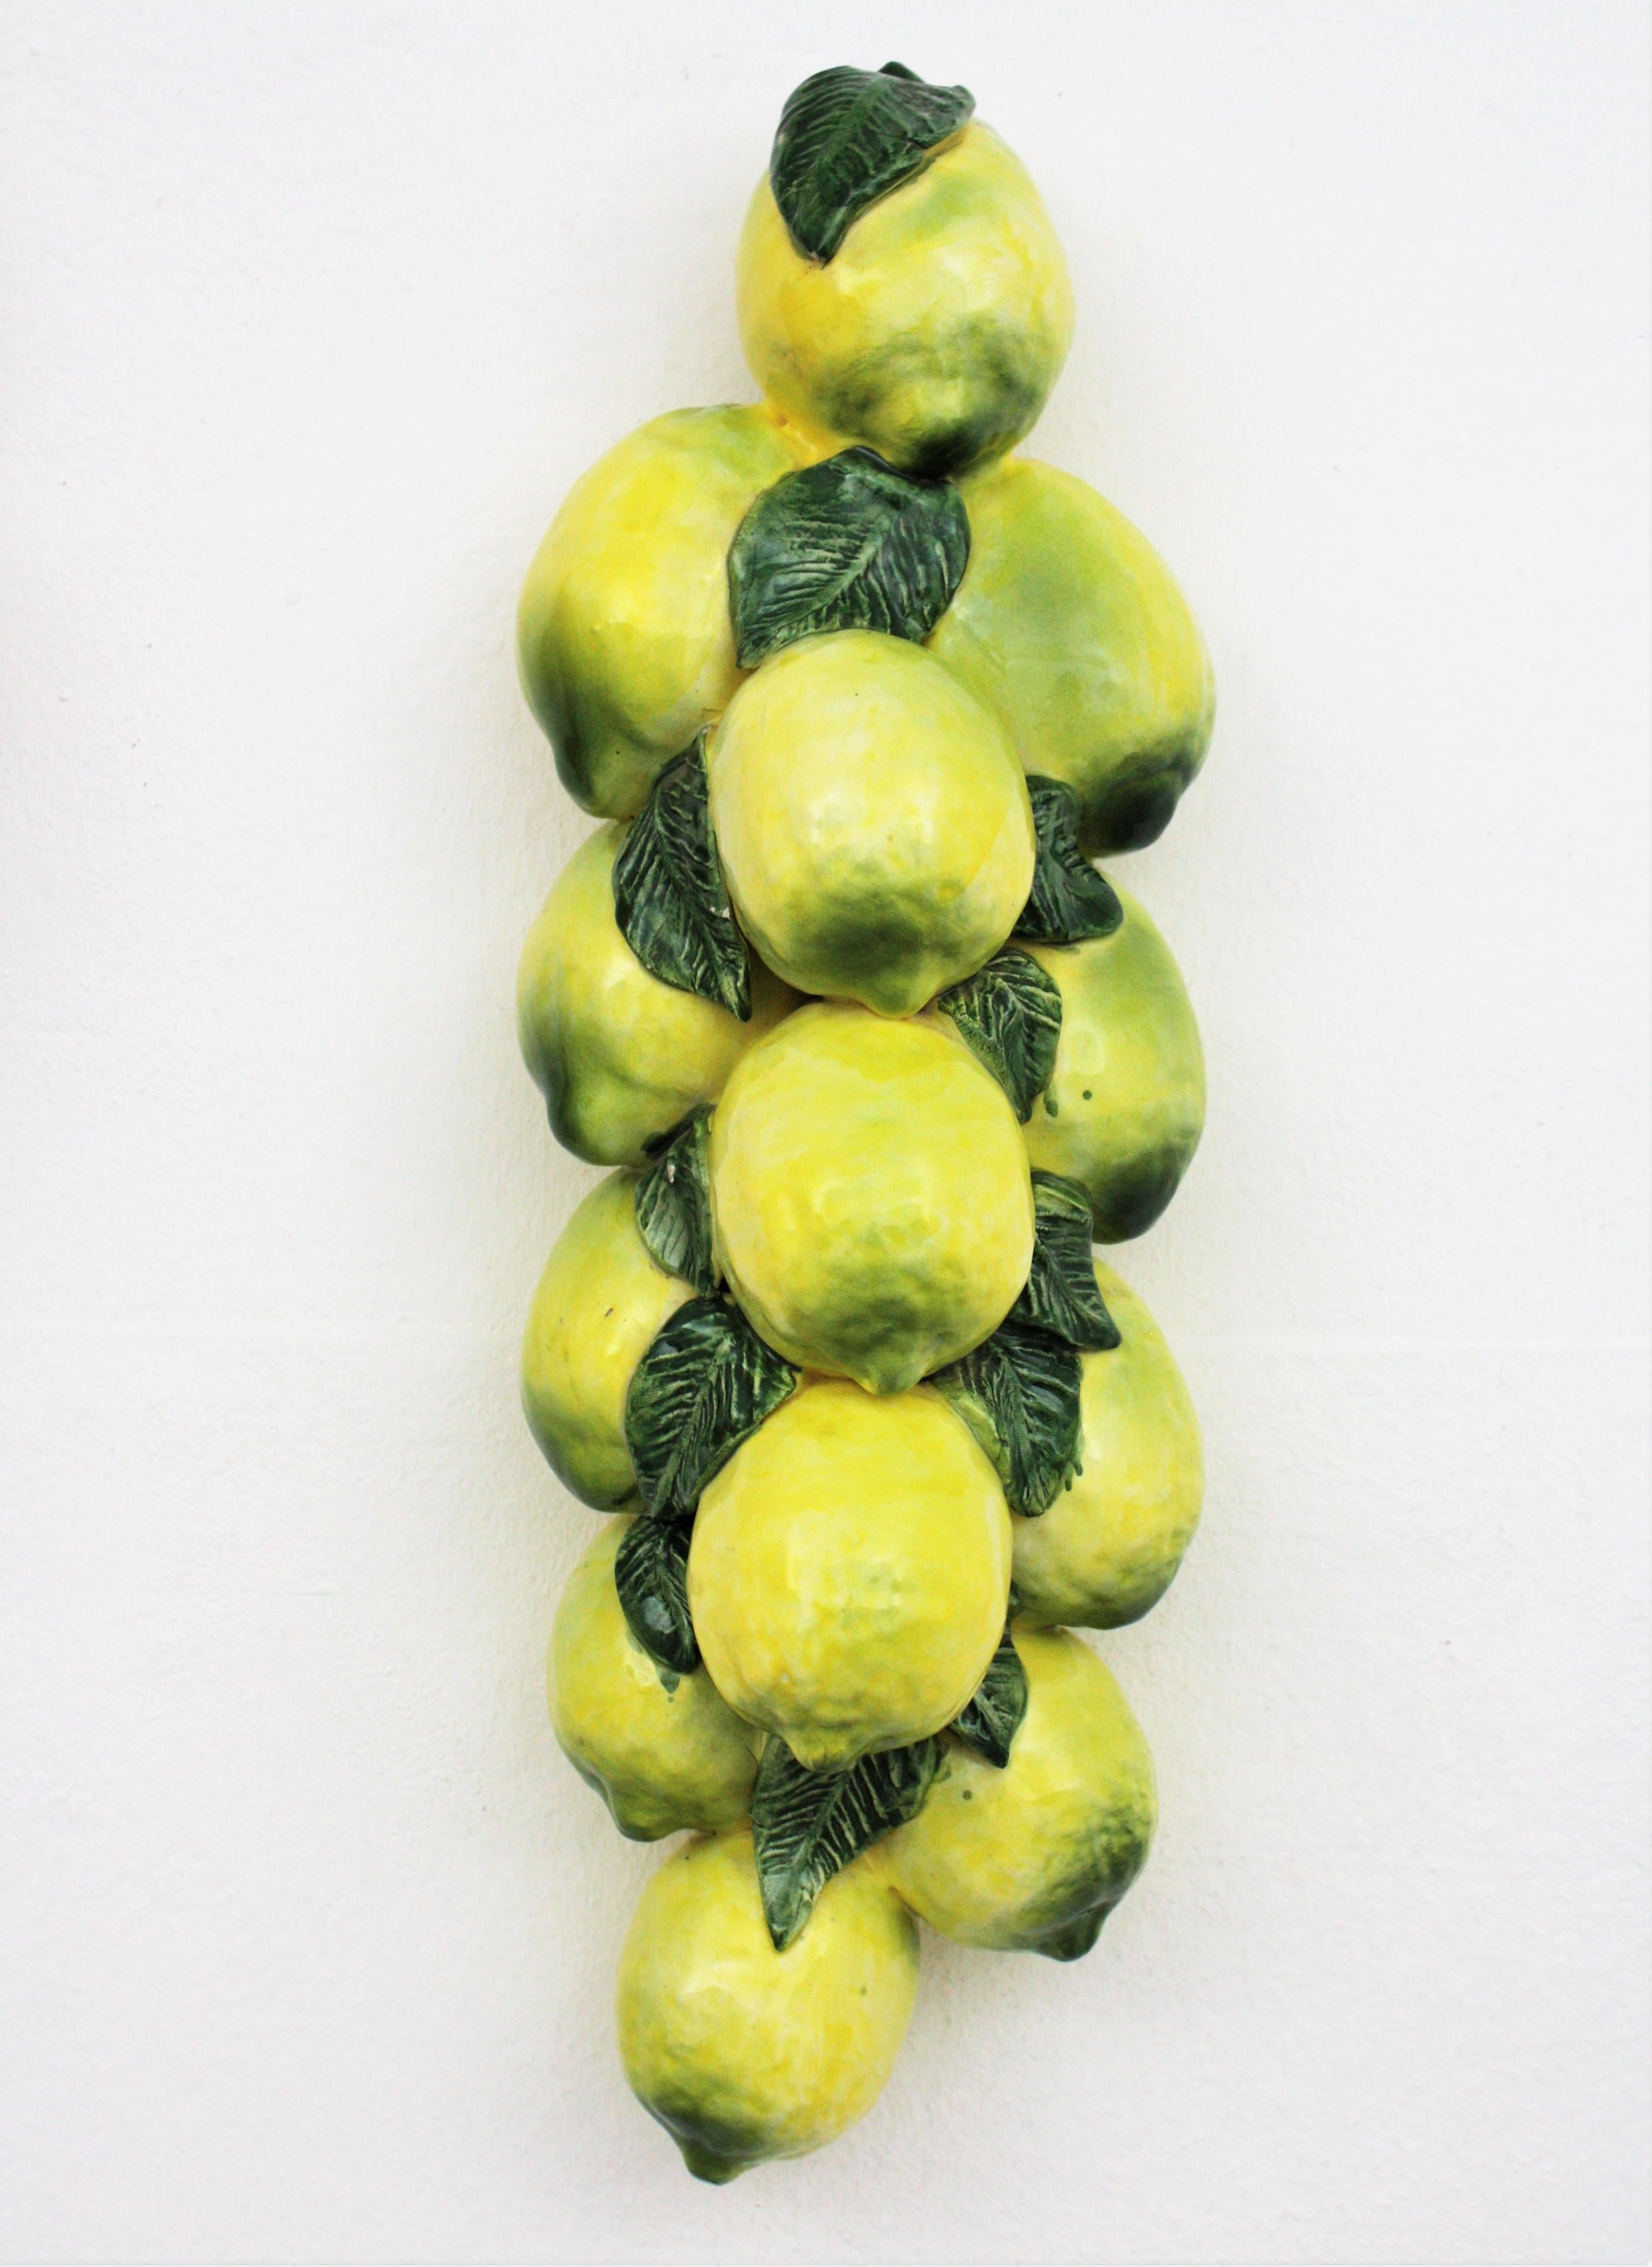 Glazed Unmatching Pair of Ceramic Wall Decorations, Lemons and Oranges Design